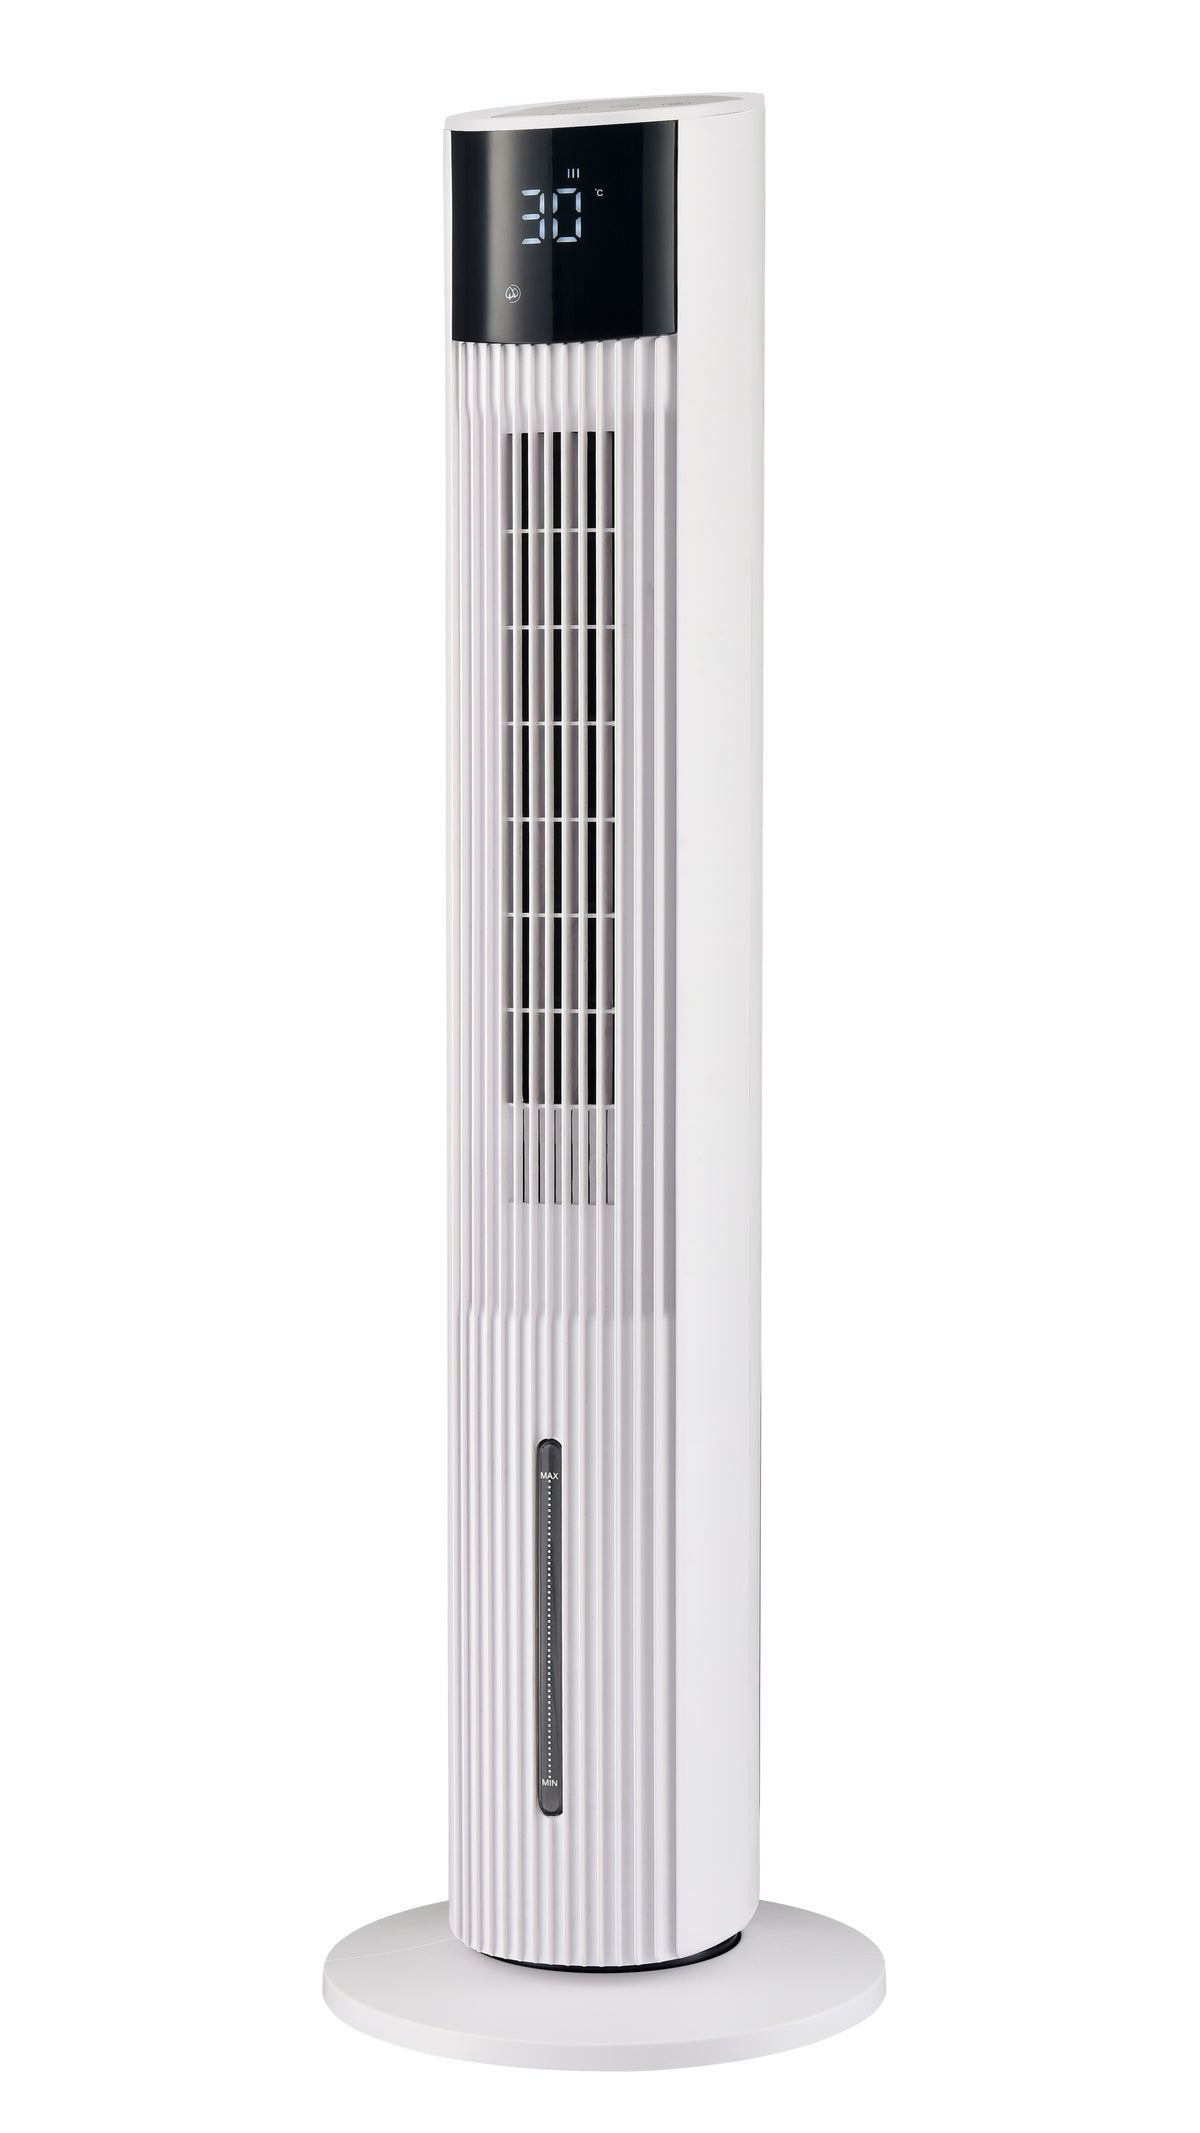 3-In-1 Air Cooler, Tower Fan and Humidifier In White 42"